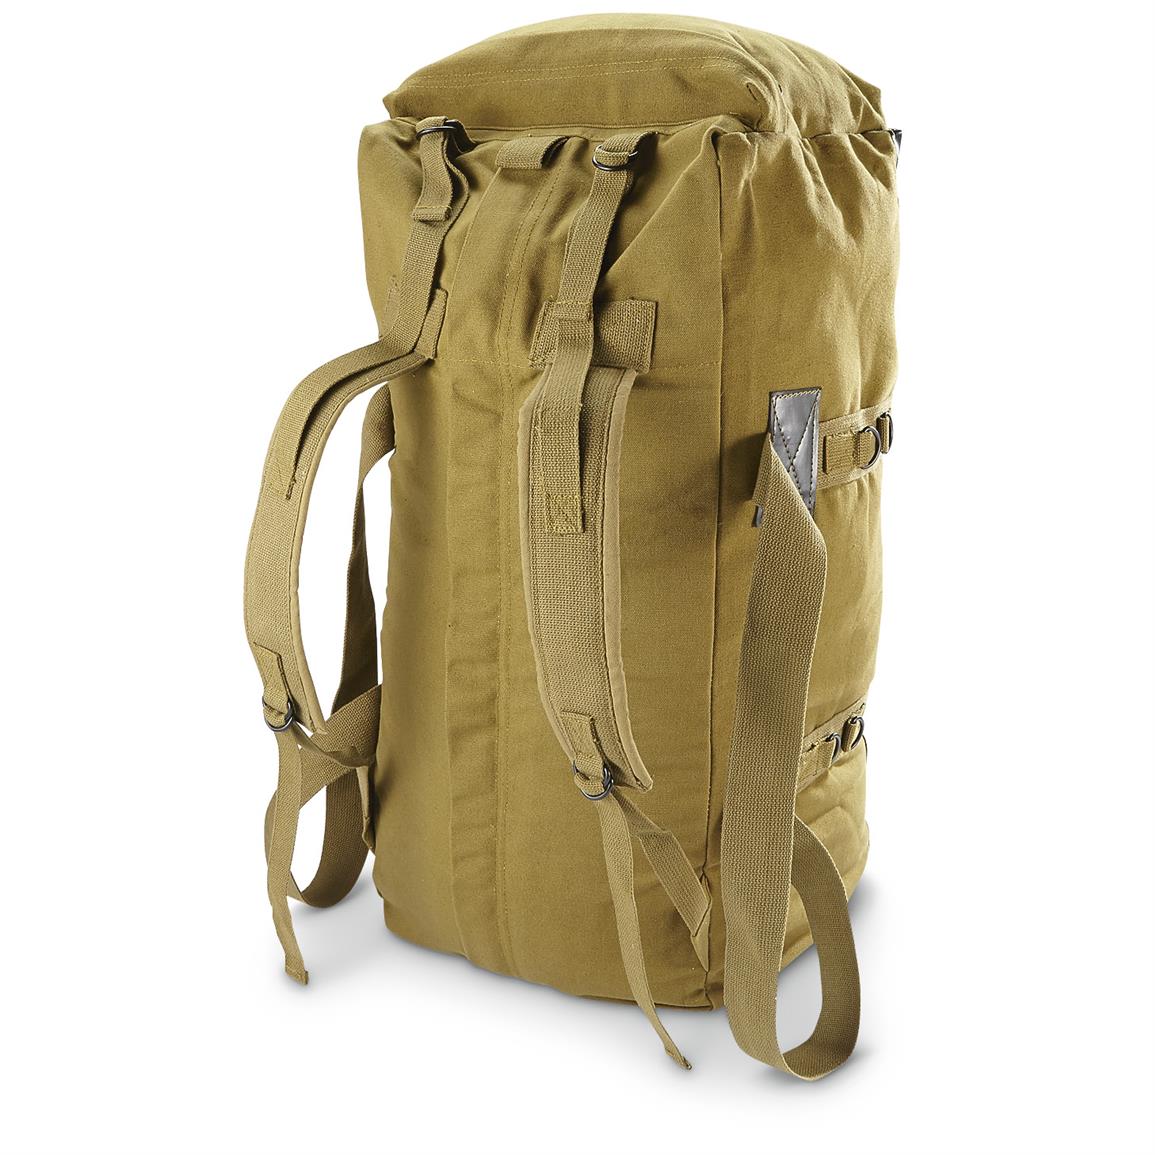 Cheap Military Duffle Bags For Sale | Confederated Tribes of the Umatilla Indian Reservation